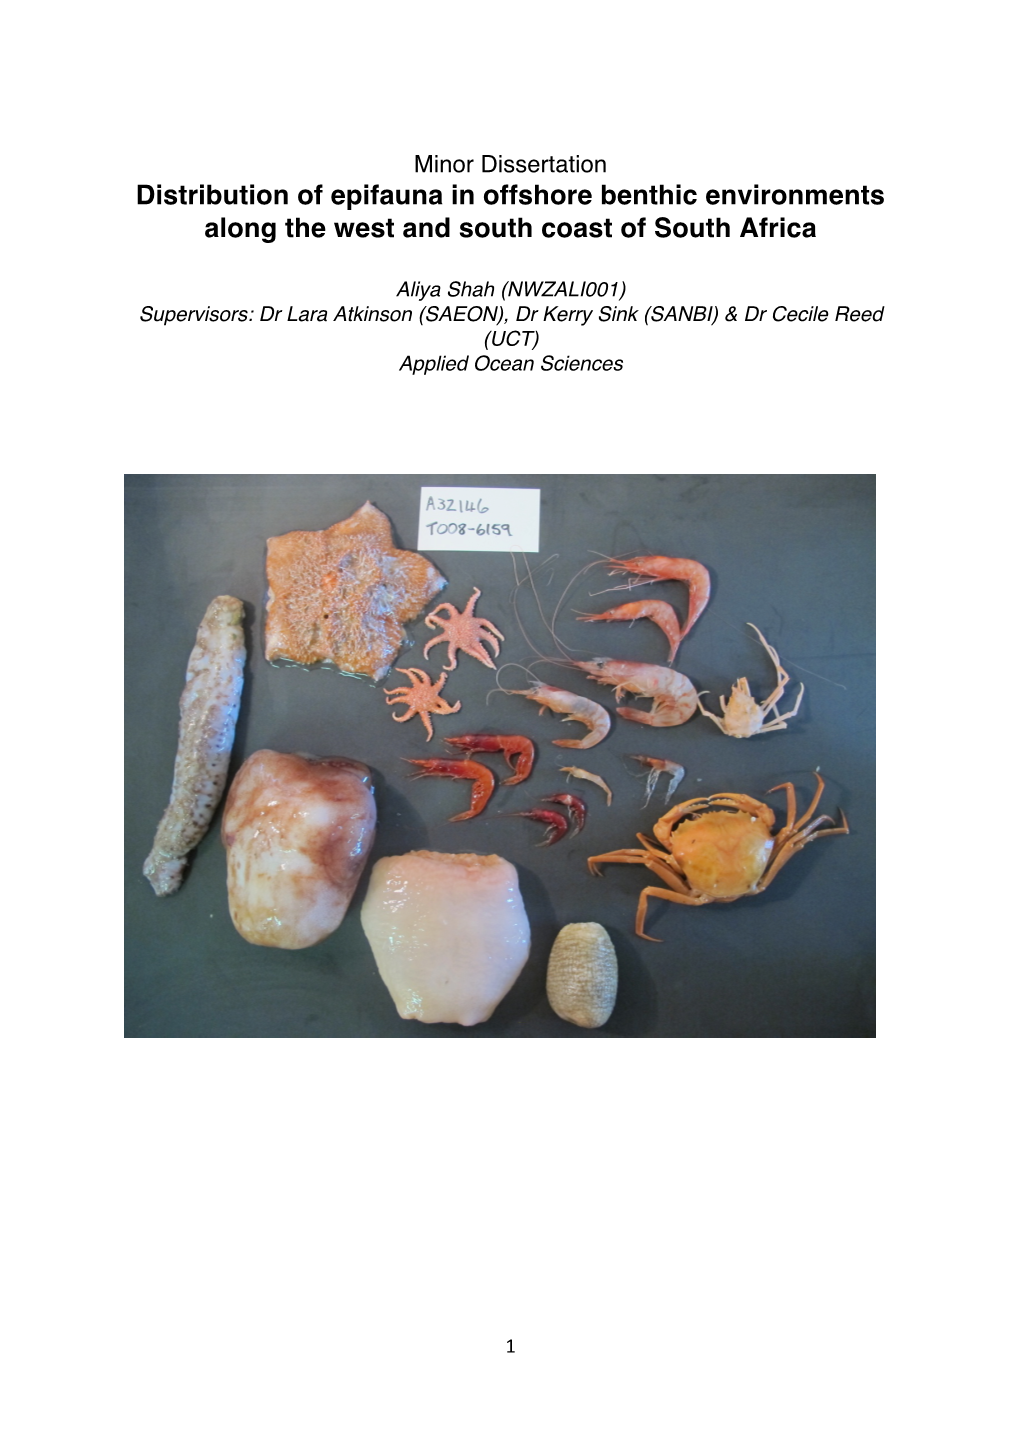 Benthic Environments Along the West and South Coast of South Africa